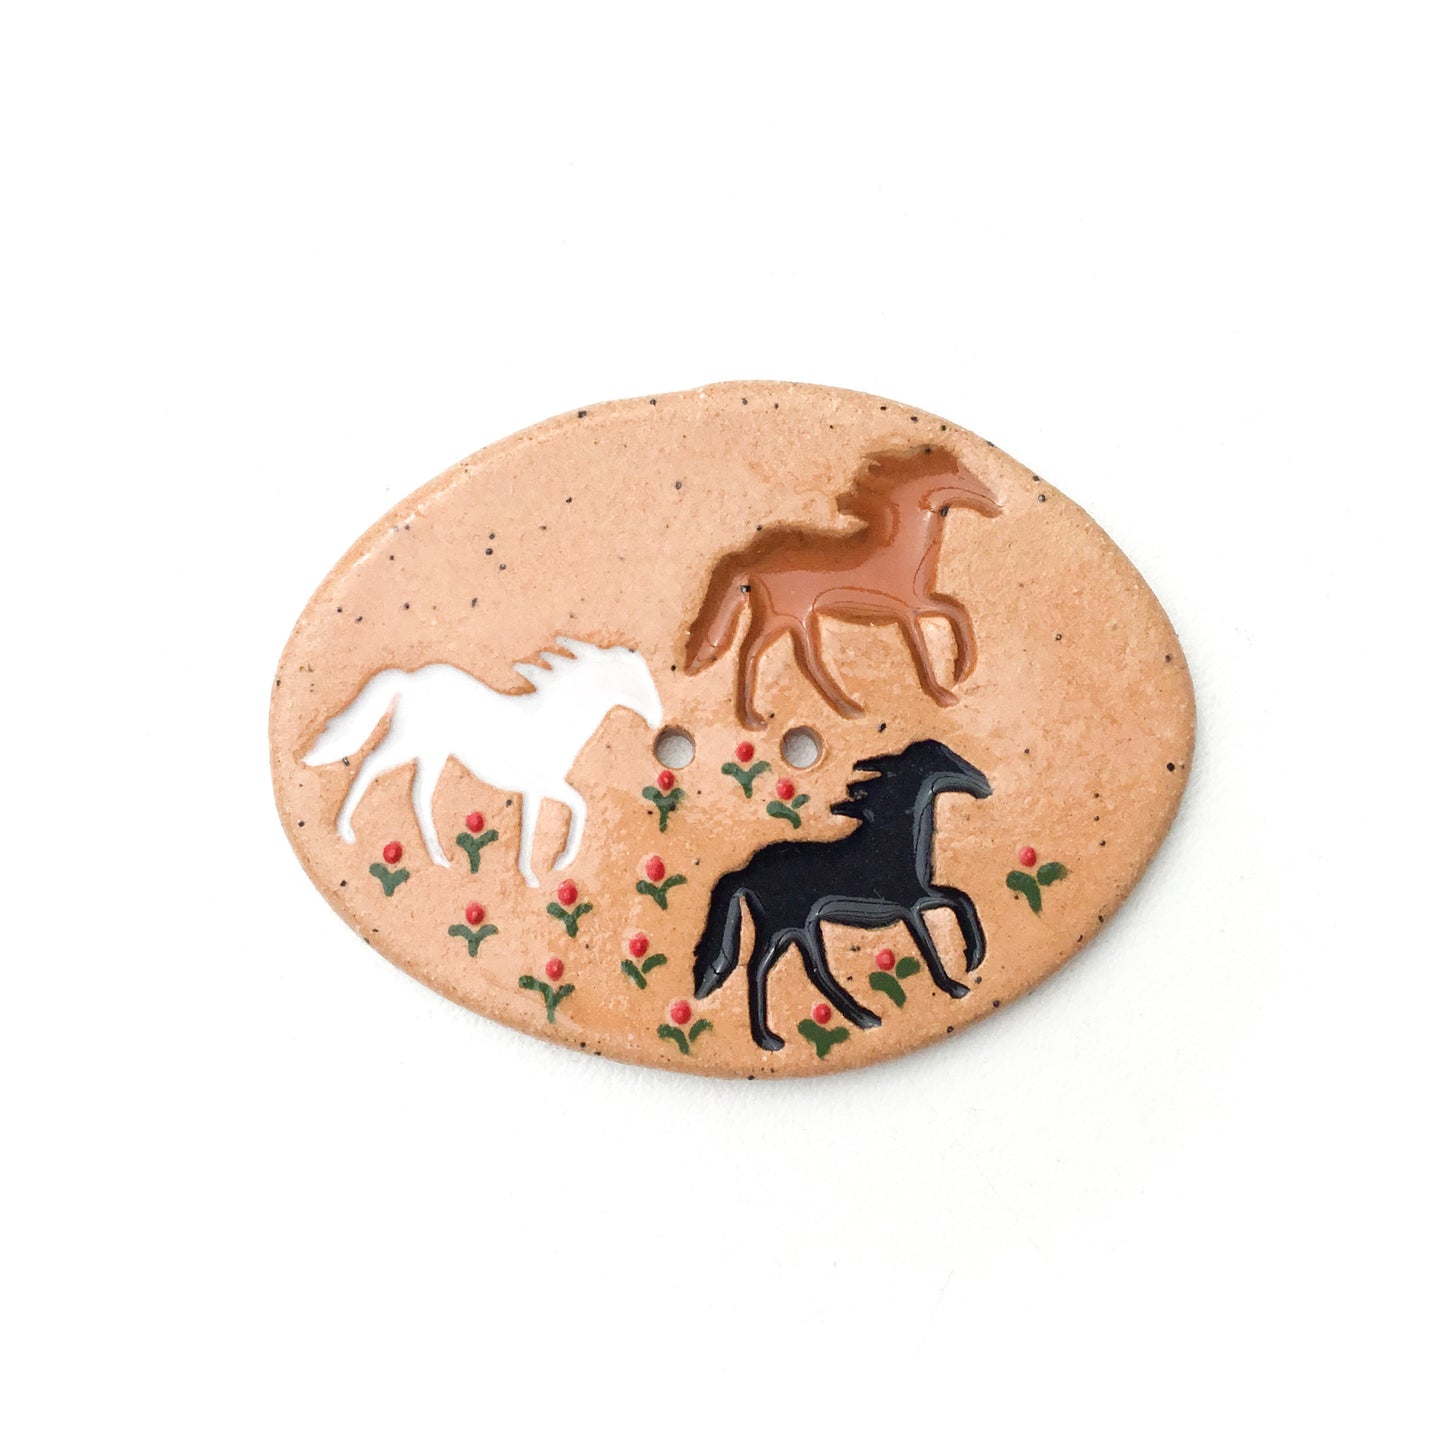 Large Running Horse Button 1-5/8” x 2-1/8”